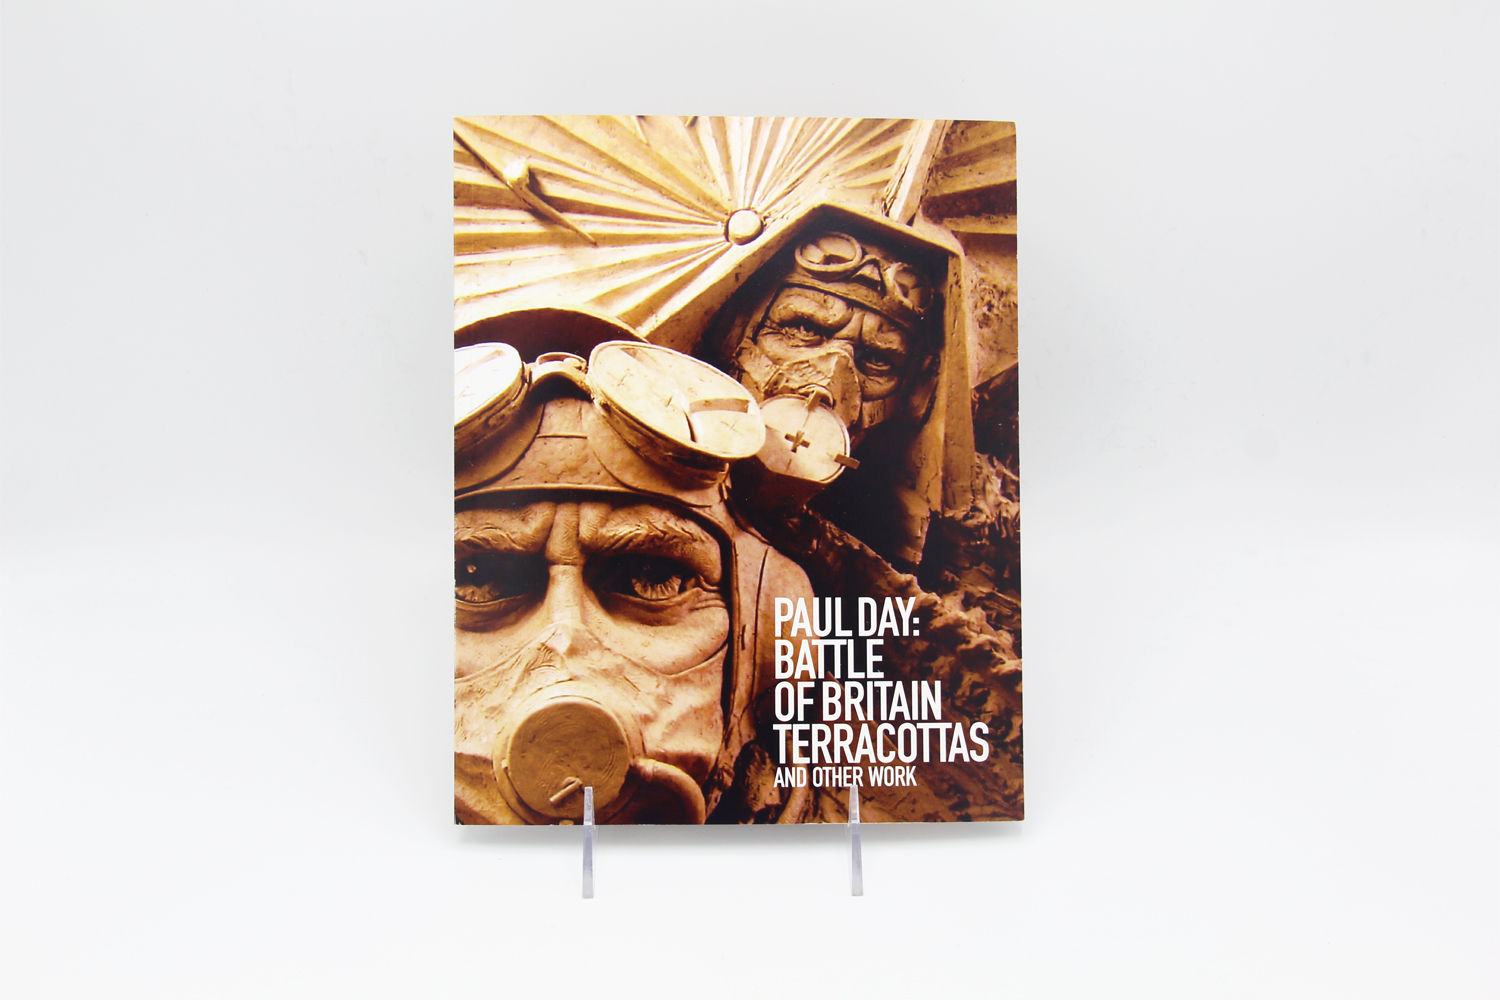 Exhibition Catalogue: Paul Day Battle of Britain Terracottas and Other Works Product Image 1 of 1